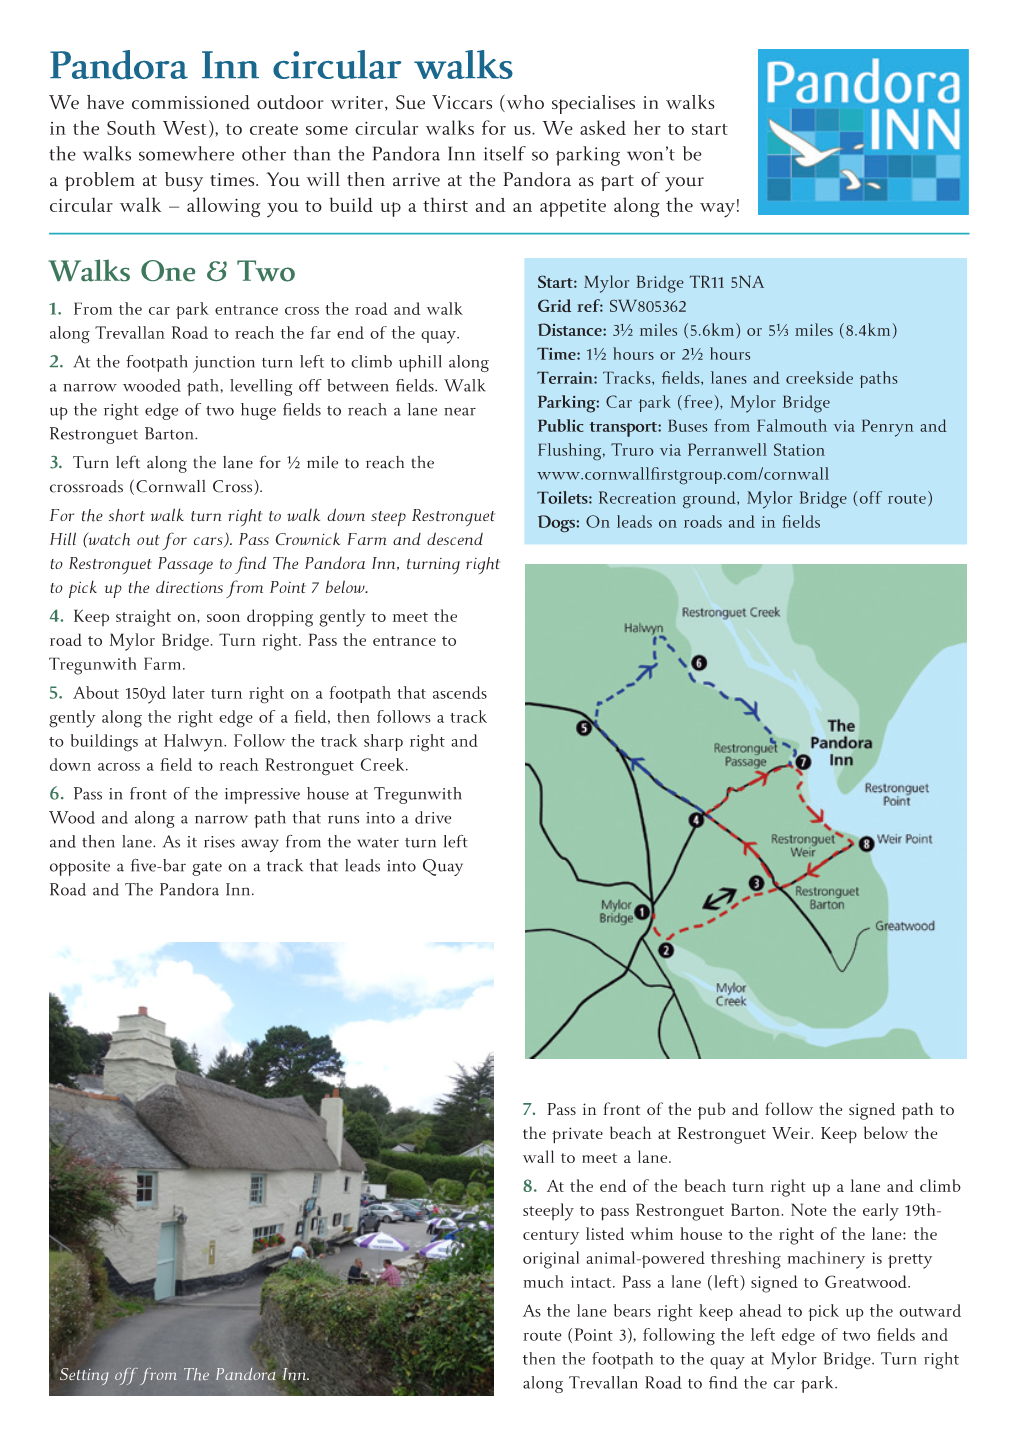 Pandora Inn Circular Walks We Have Commissioned Outdoor Writer, Sue Viccars (Who Specialises in Walks in the South West), to Create Some Circular Walks for Us